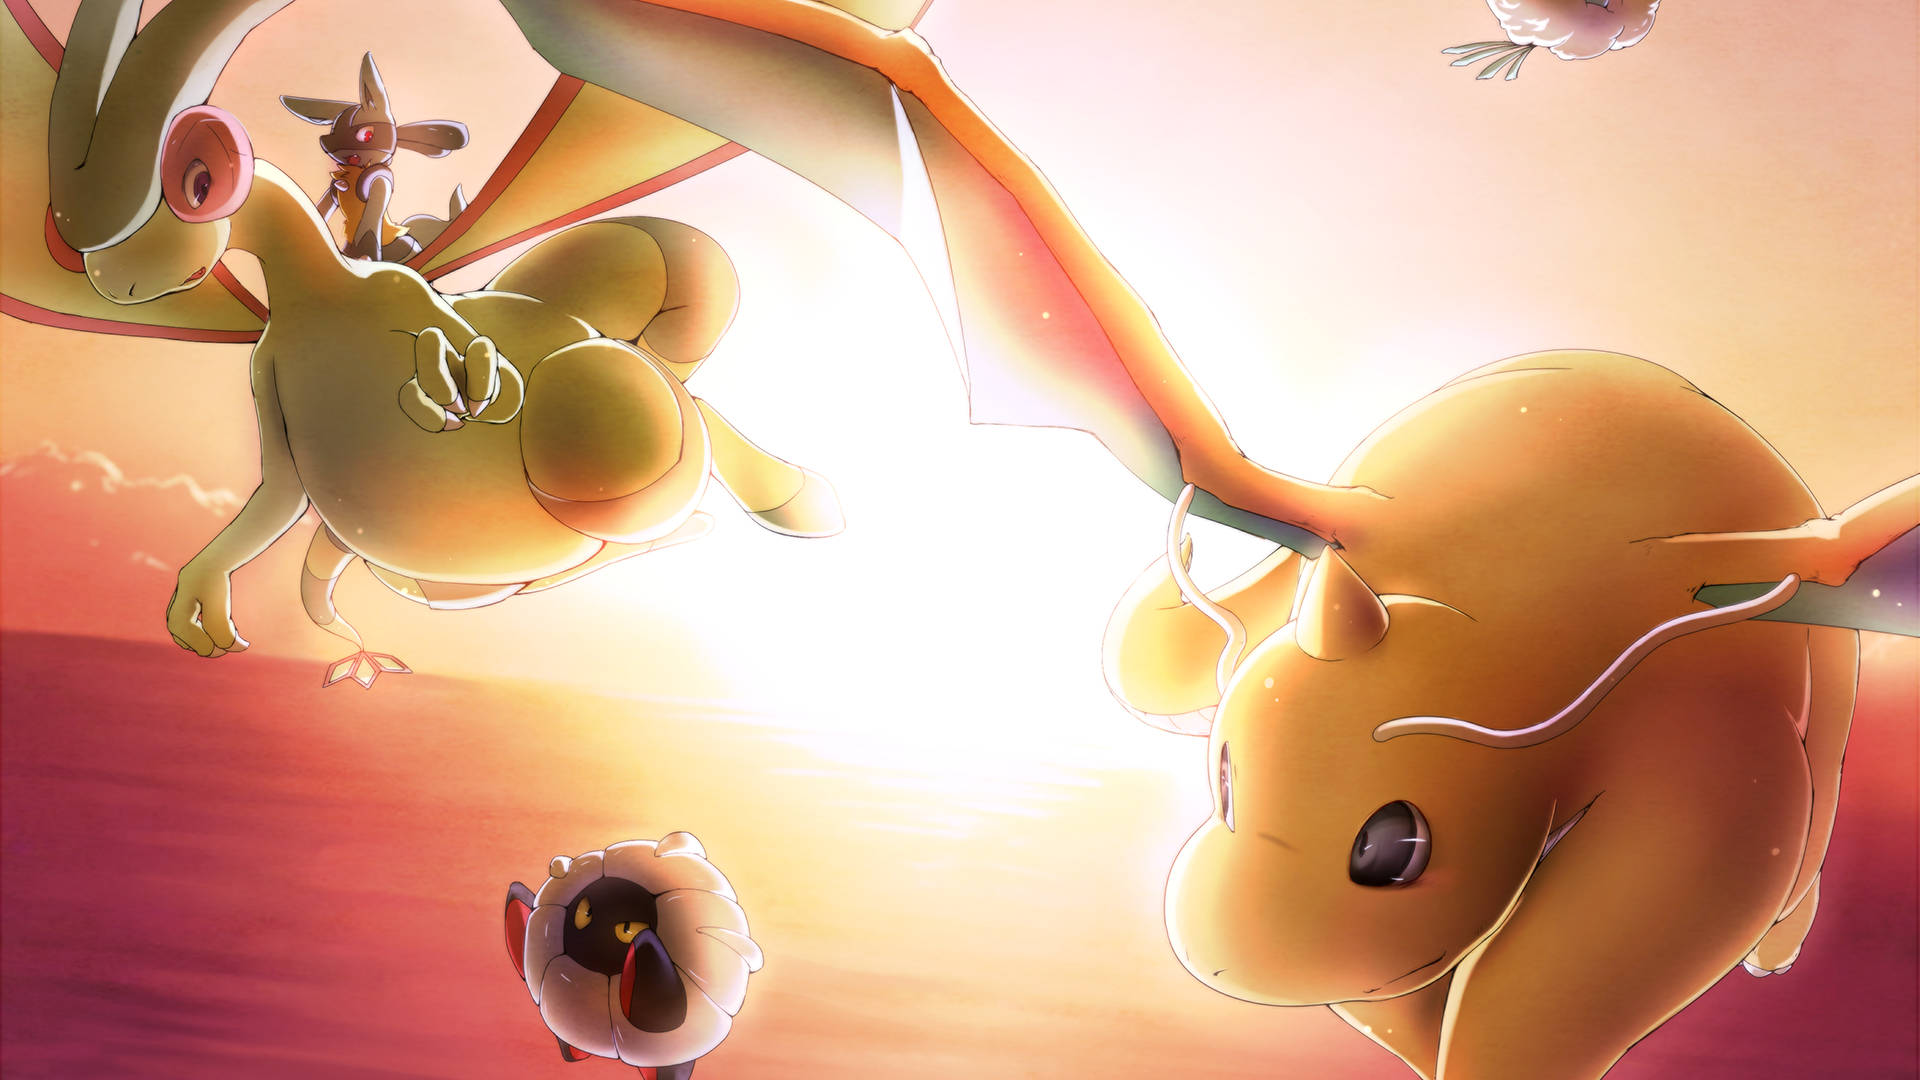 Dragonite Aerial Manoeuvres Against A Stunningly Majestic Sunset Background